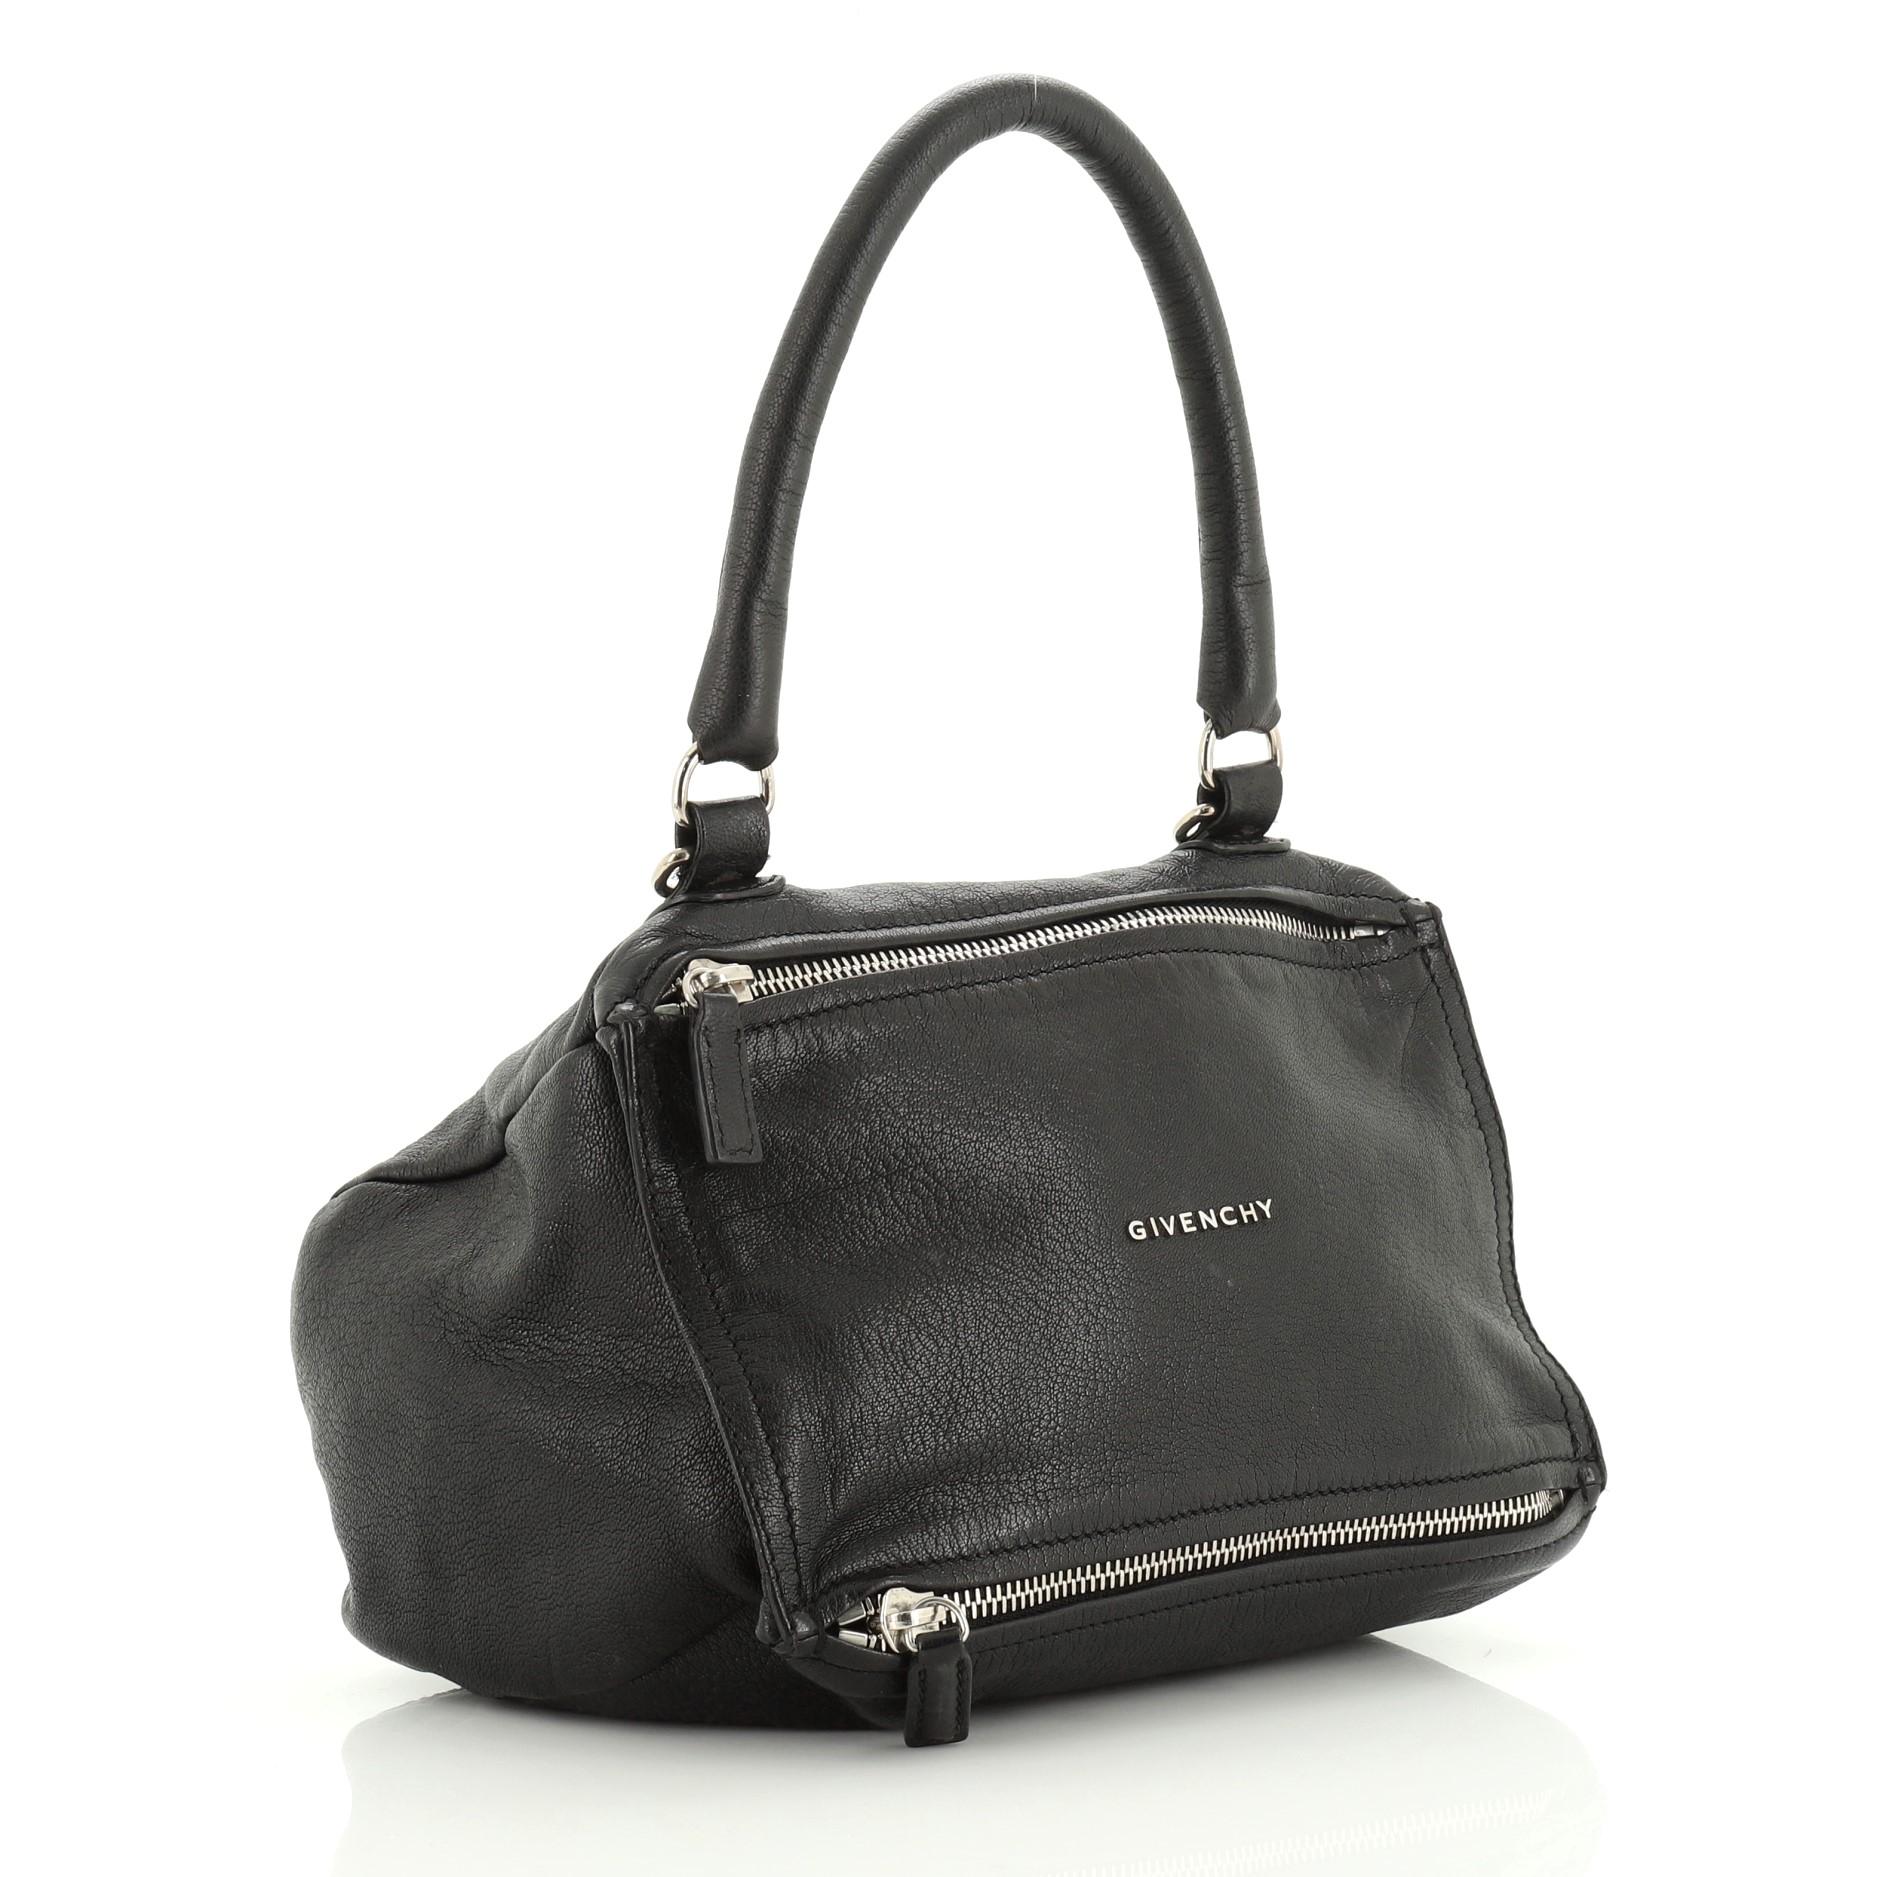 This Givenchy Pandora Bag Leather Small, crafted from black leather, features a rolled top handle, Givenchy logo at the center, and silver-tone hardware. Its two-way zip fastenings open to a black fabric interior with side zip and slip pockets.